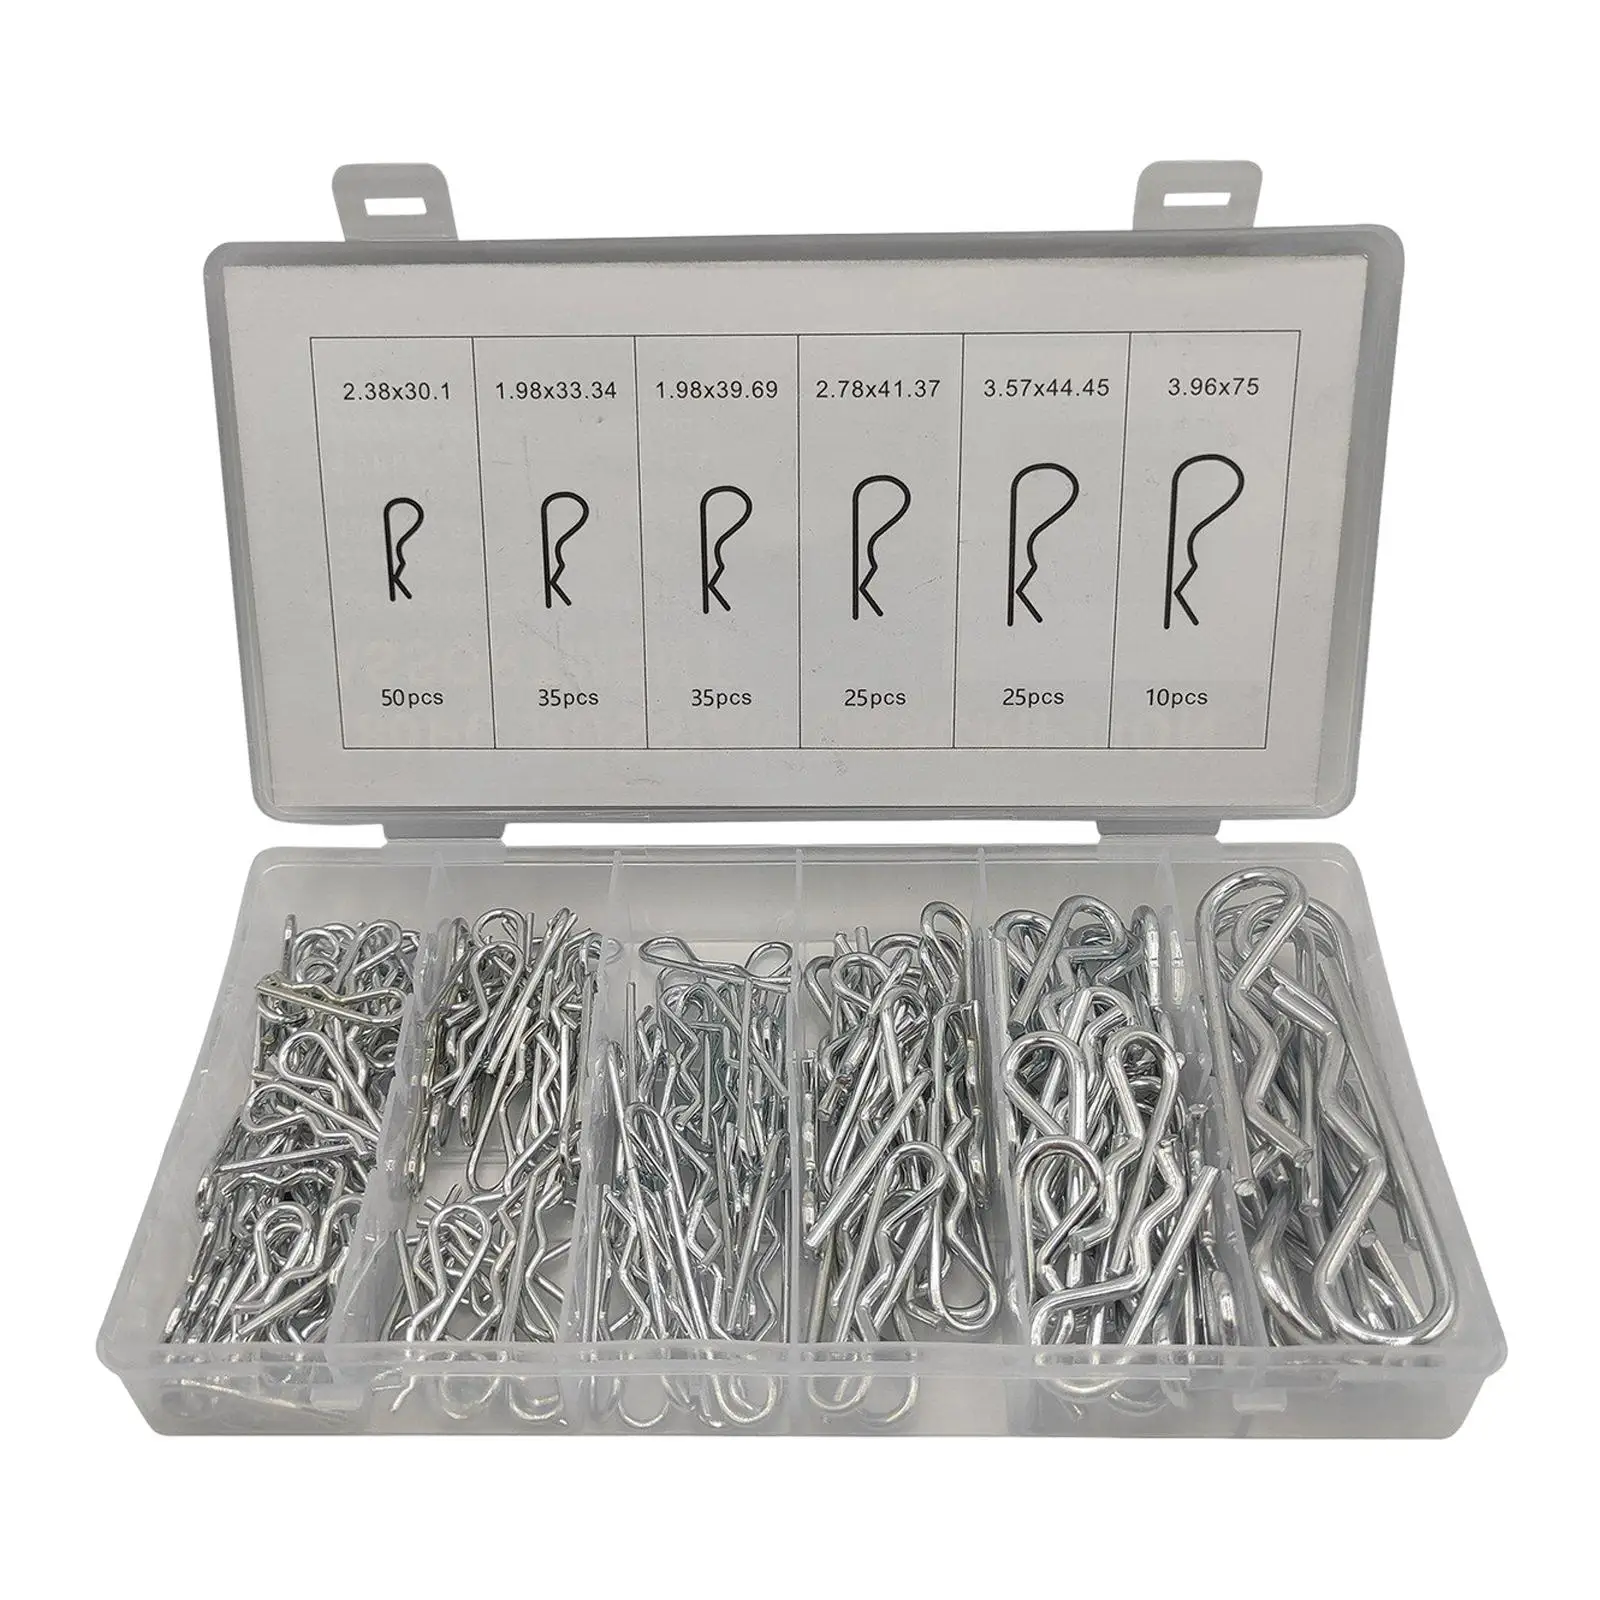 180Pcs Hitch Hair R Cotter Pin for Workshops Power Equipment with PP Case